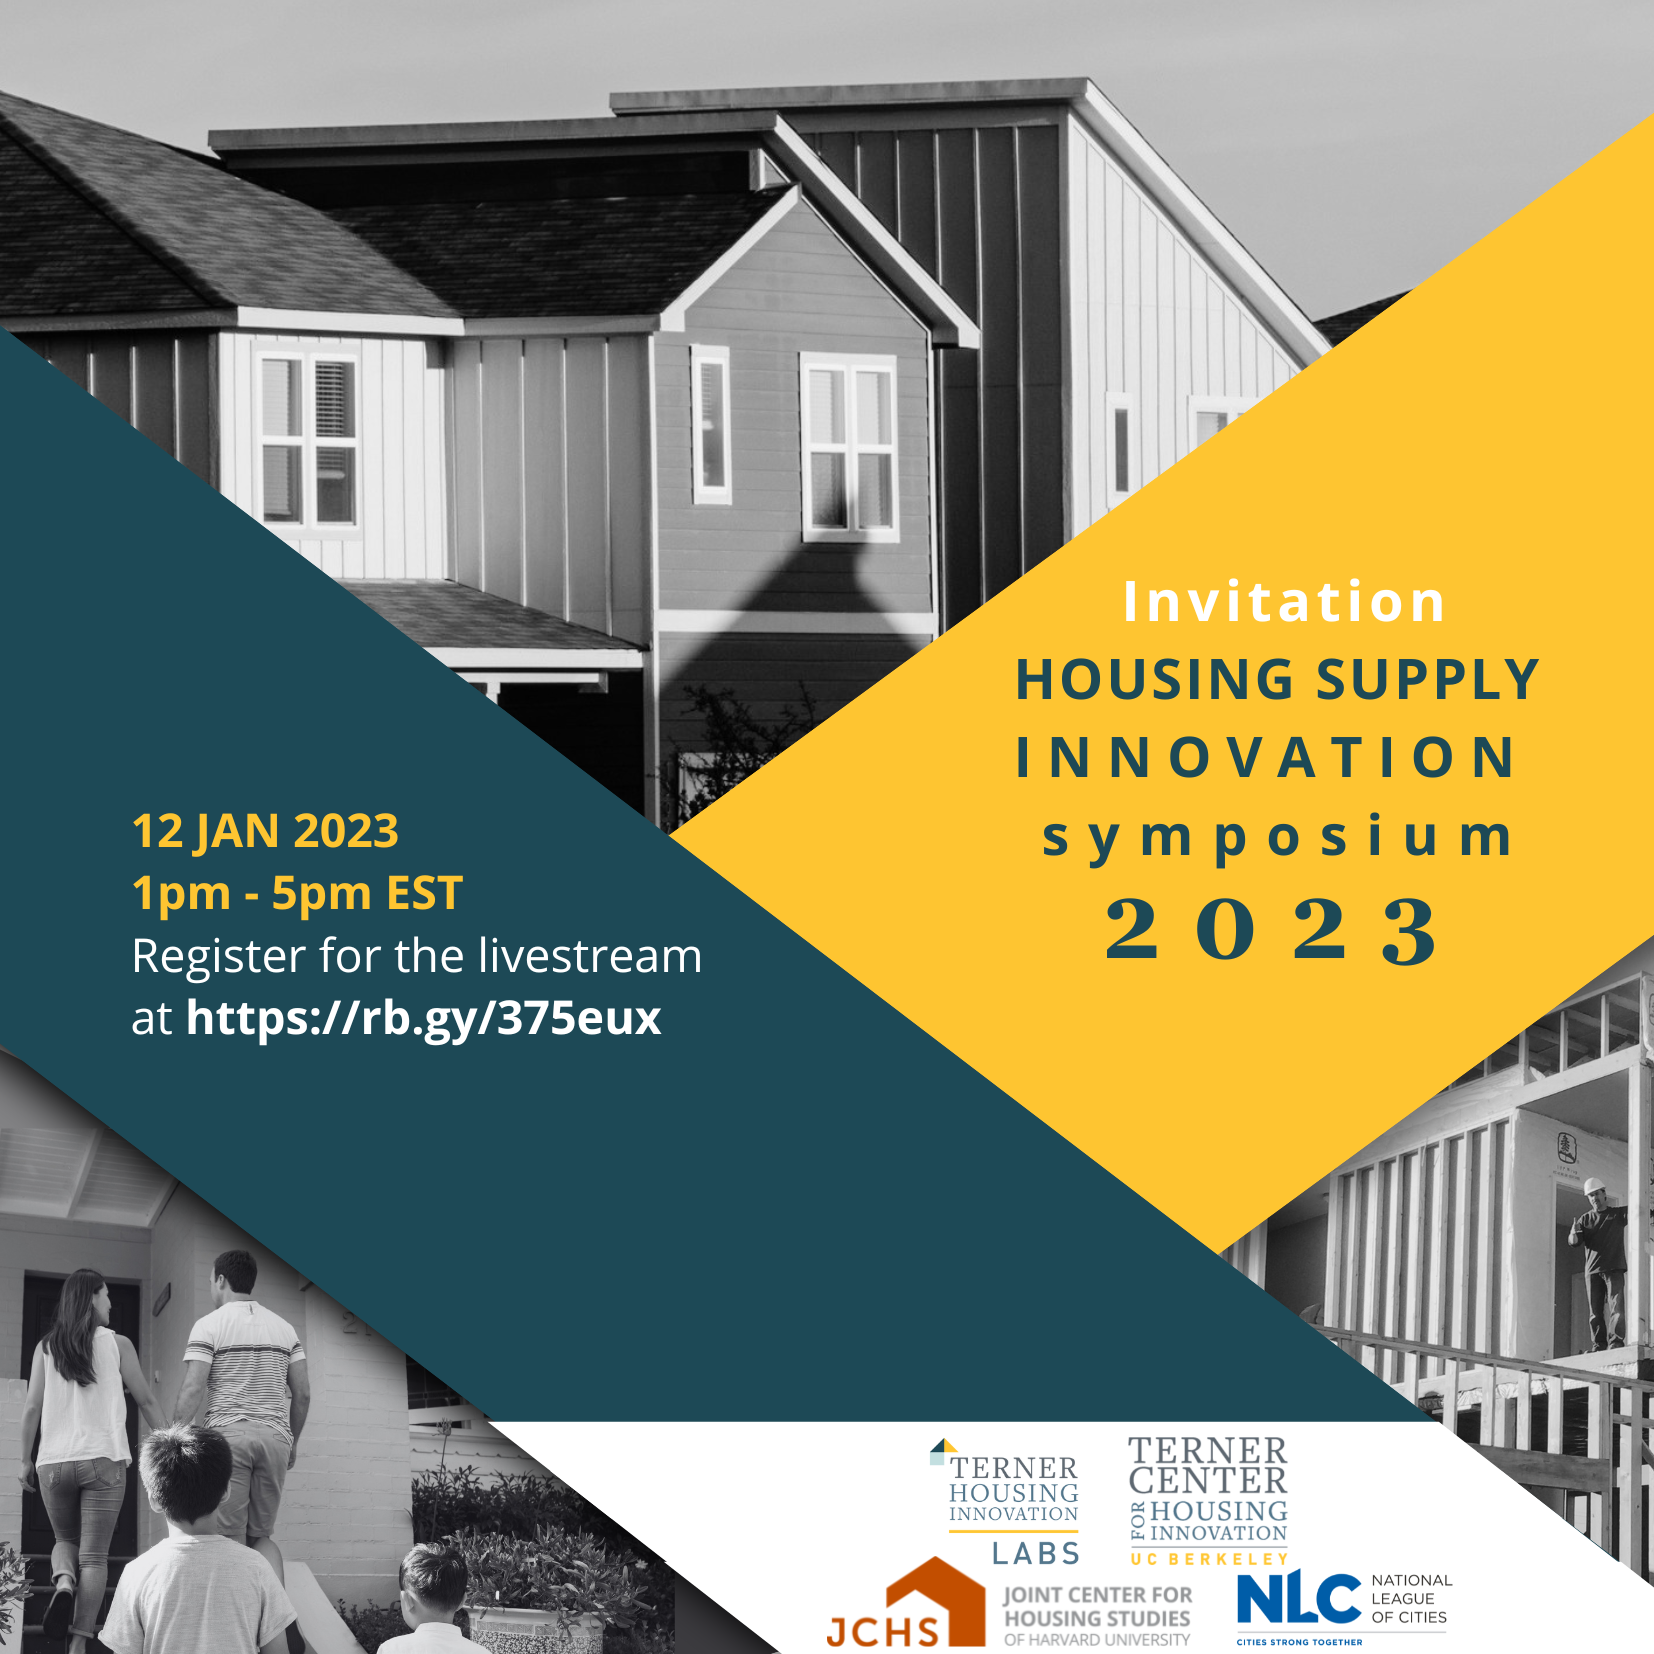 Invitation Housing Supply Innovation Symposium 2023 | 12 Jan 2023 1 pm - 5 pm EST. Register for the livestream. Logos for the Terner Housing Innovation Labs, Terner Center, Joint Center for Housing Studies, National League of Cities